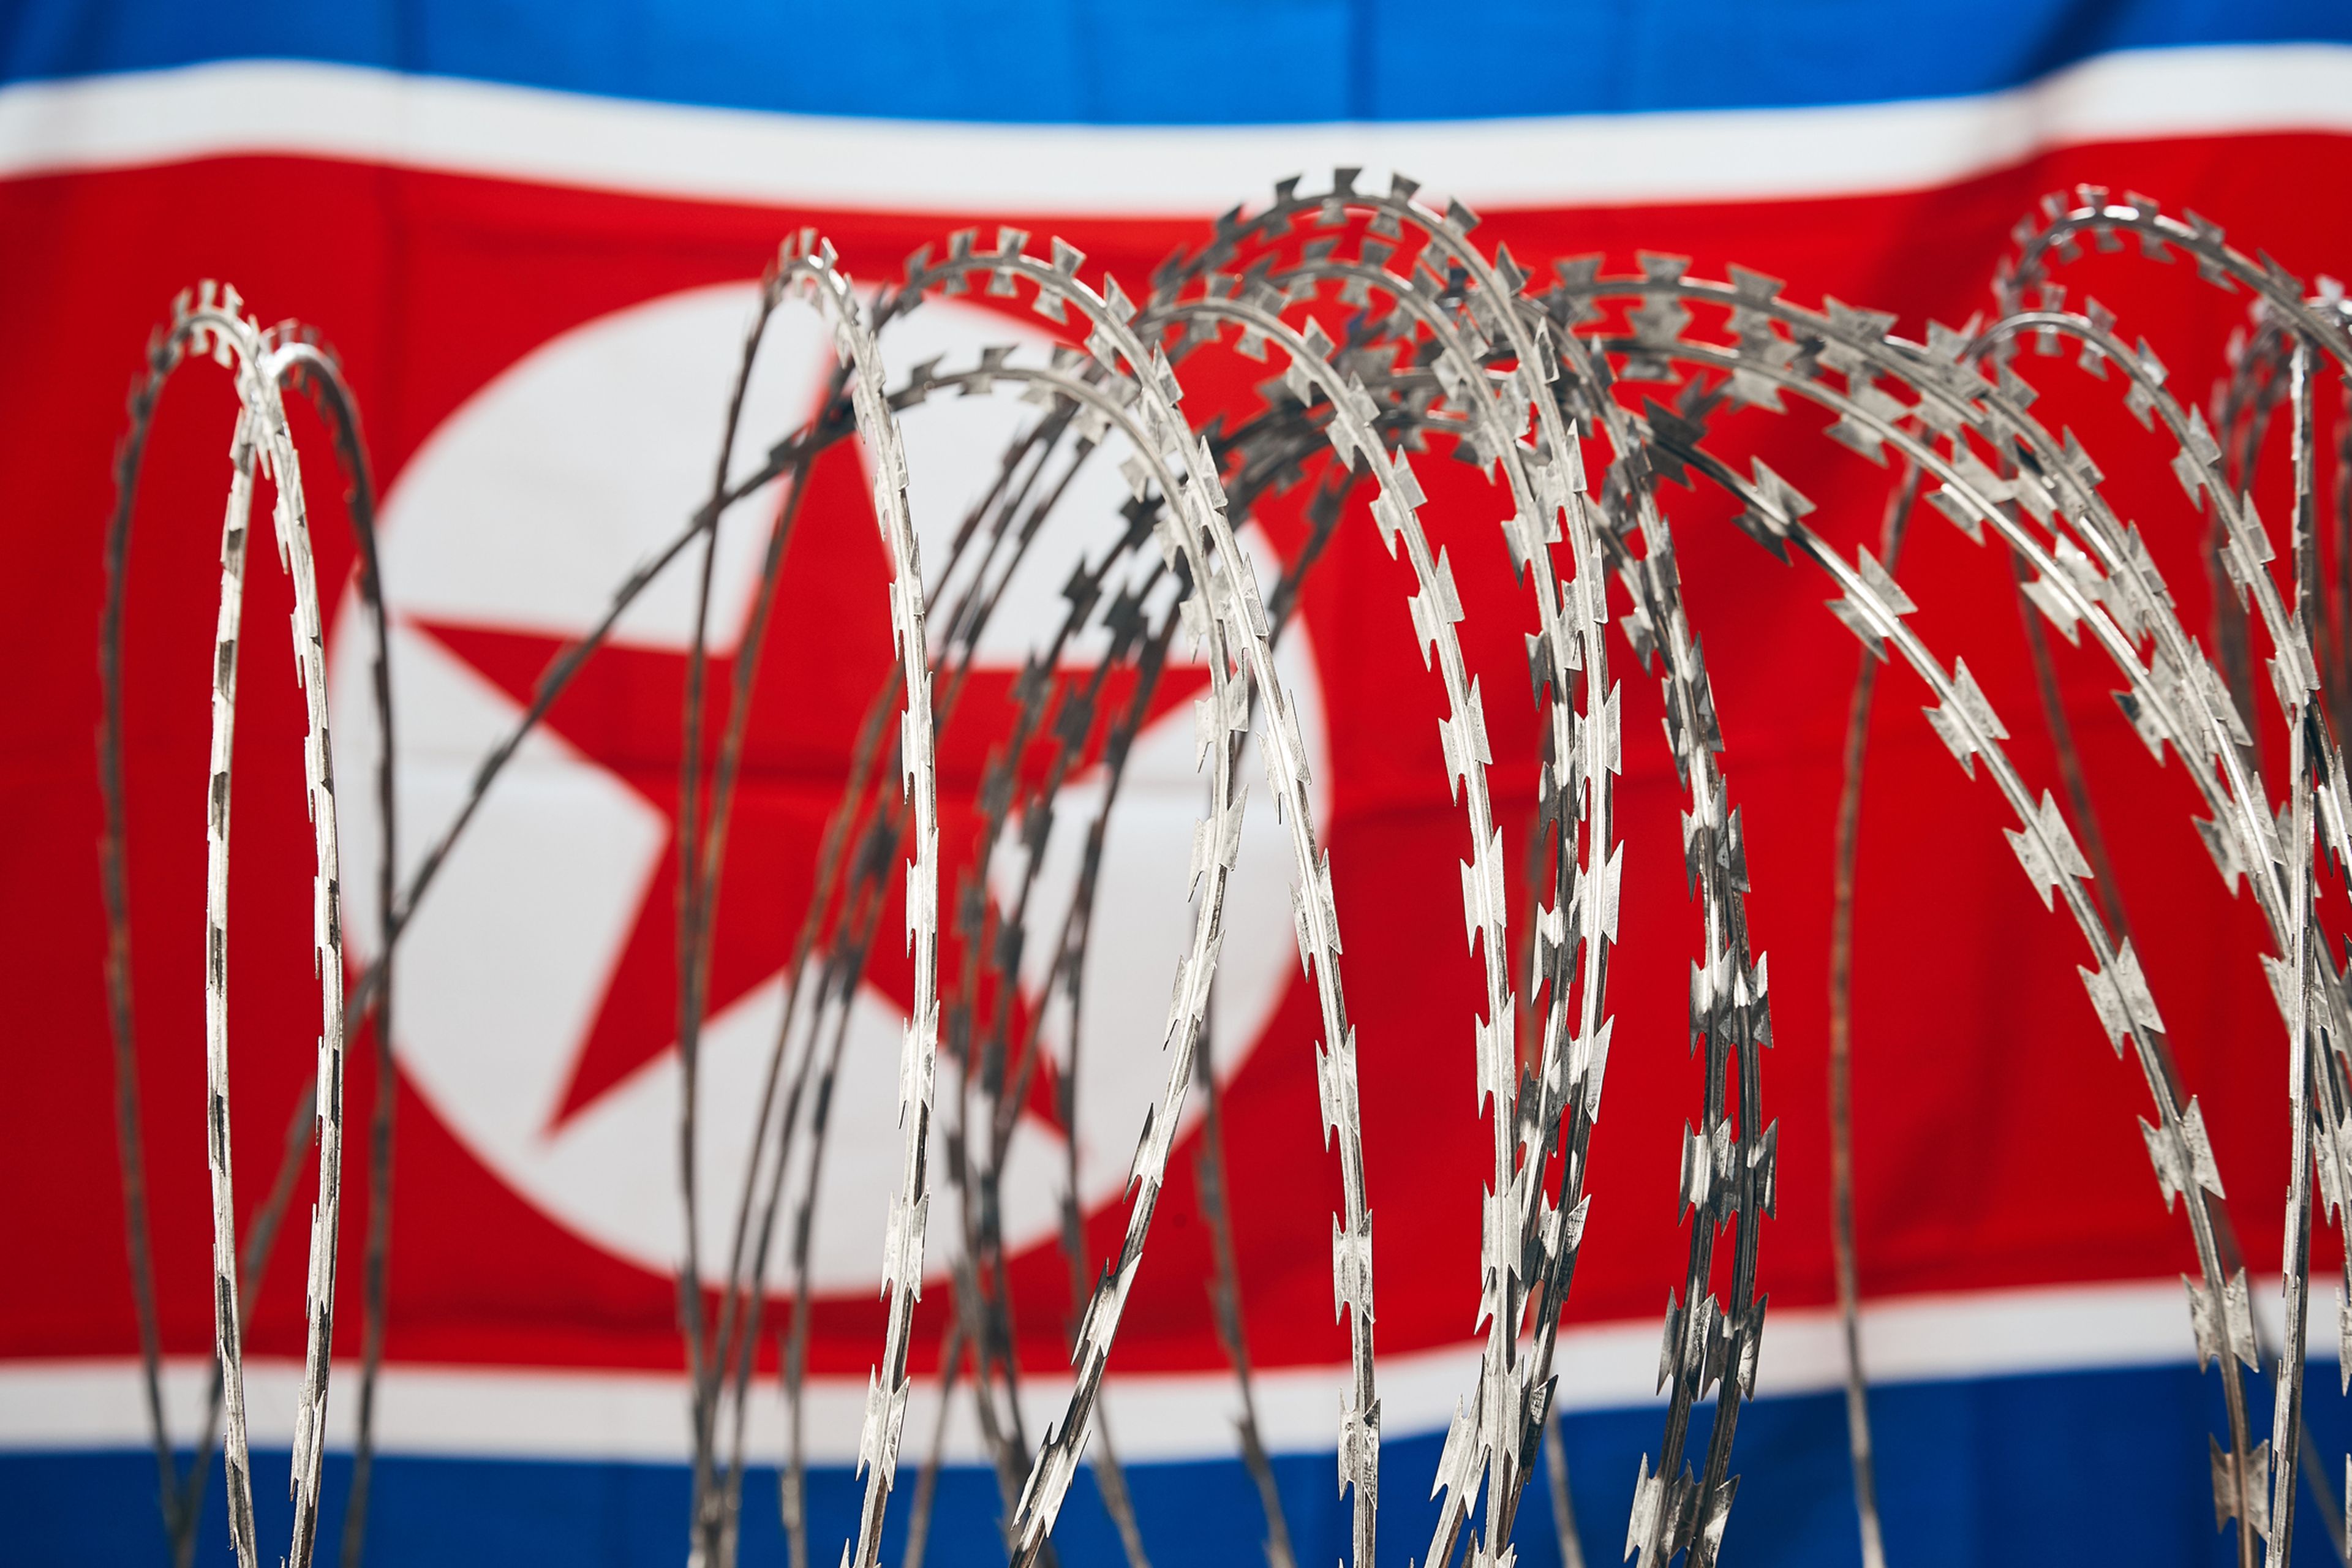 Barbed wire barricade seen in front of the national flag of North Korea